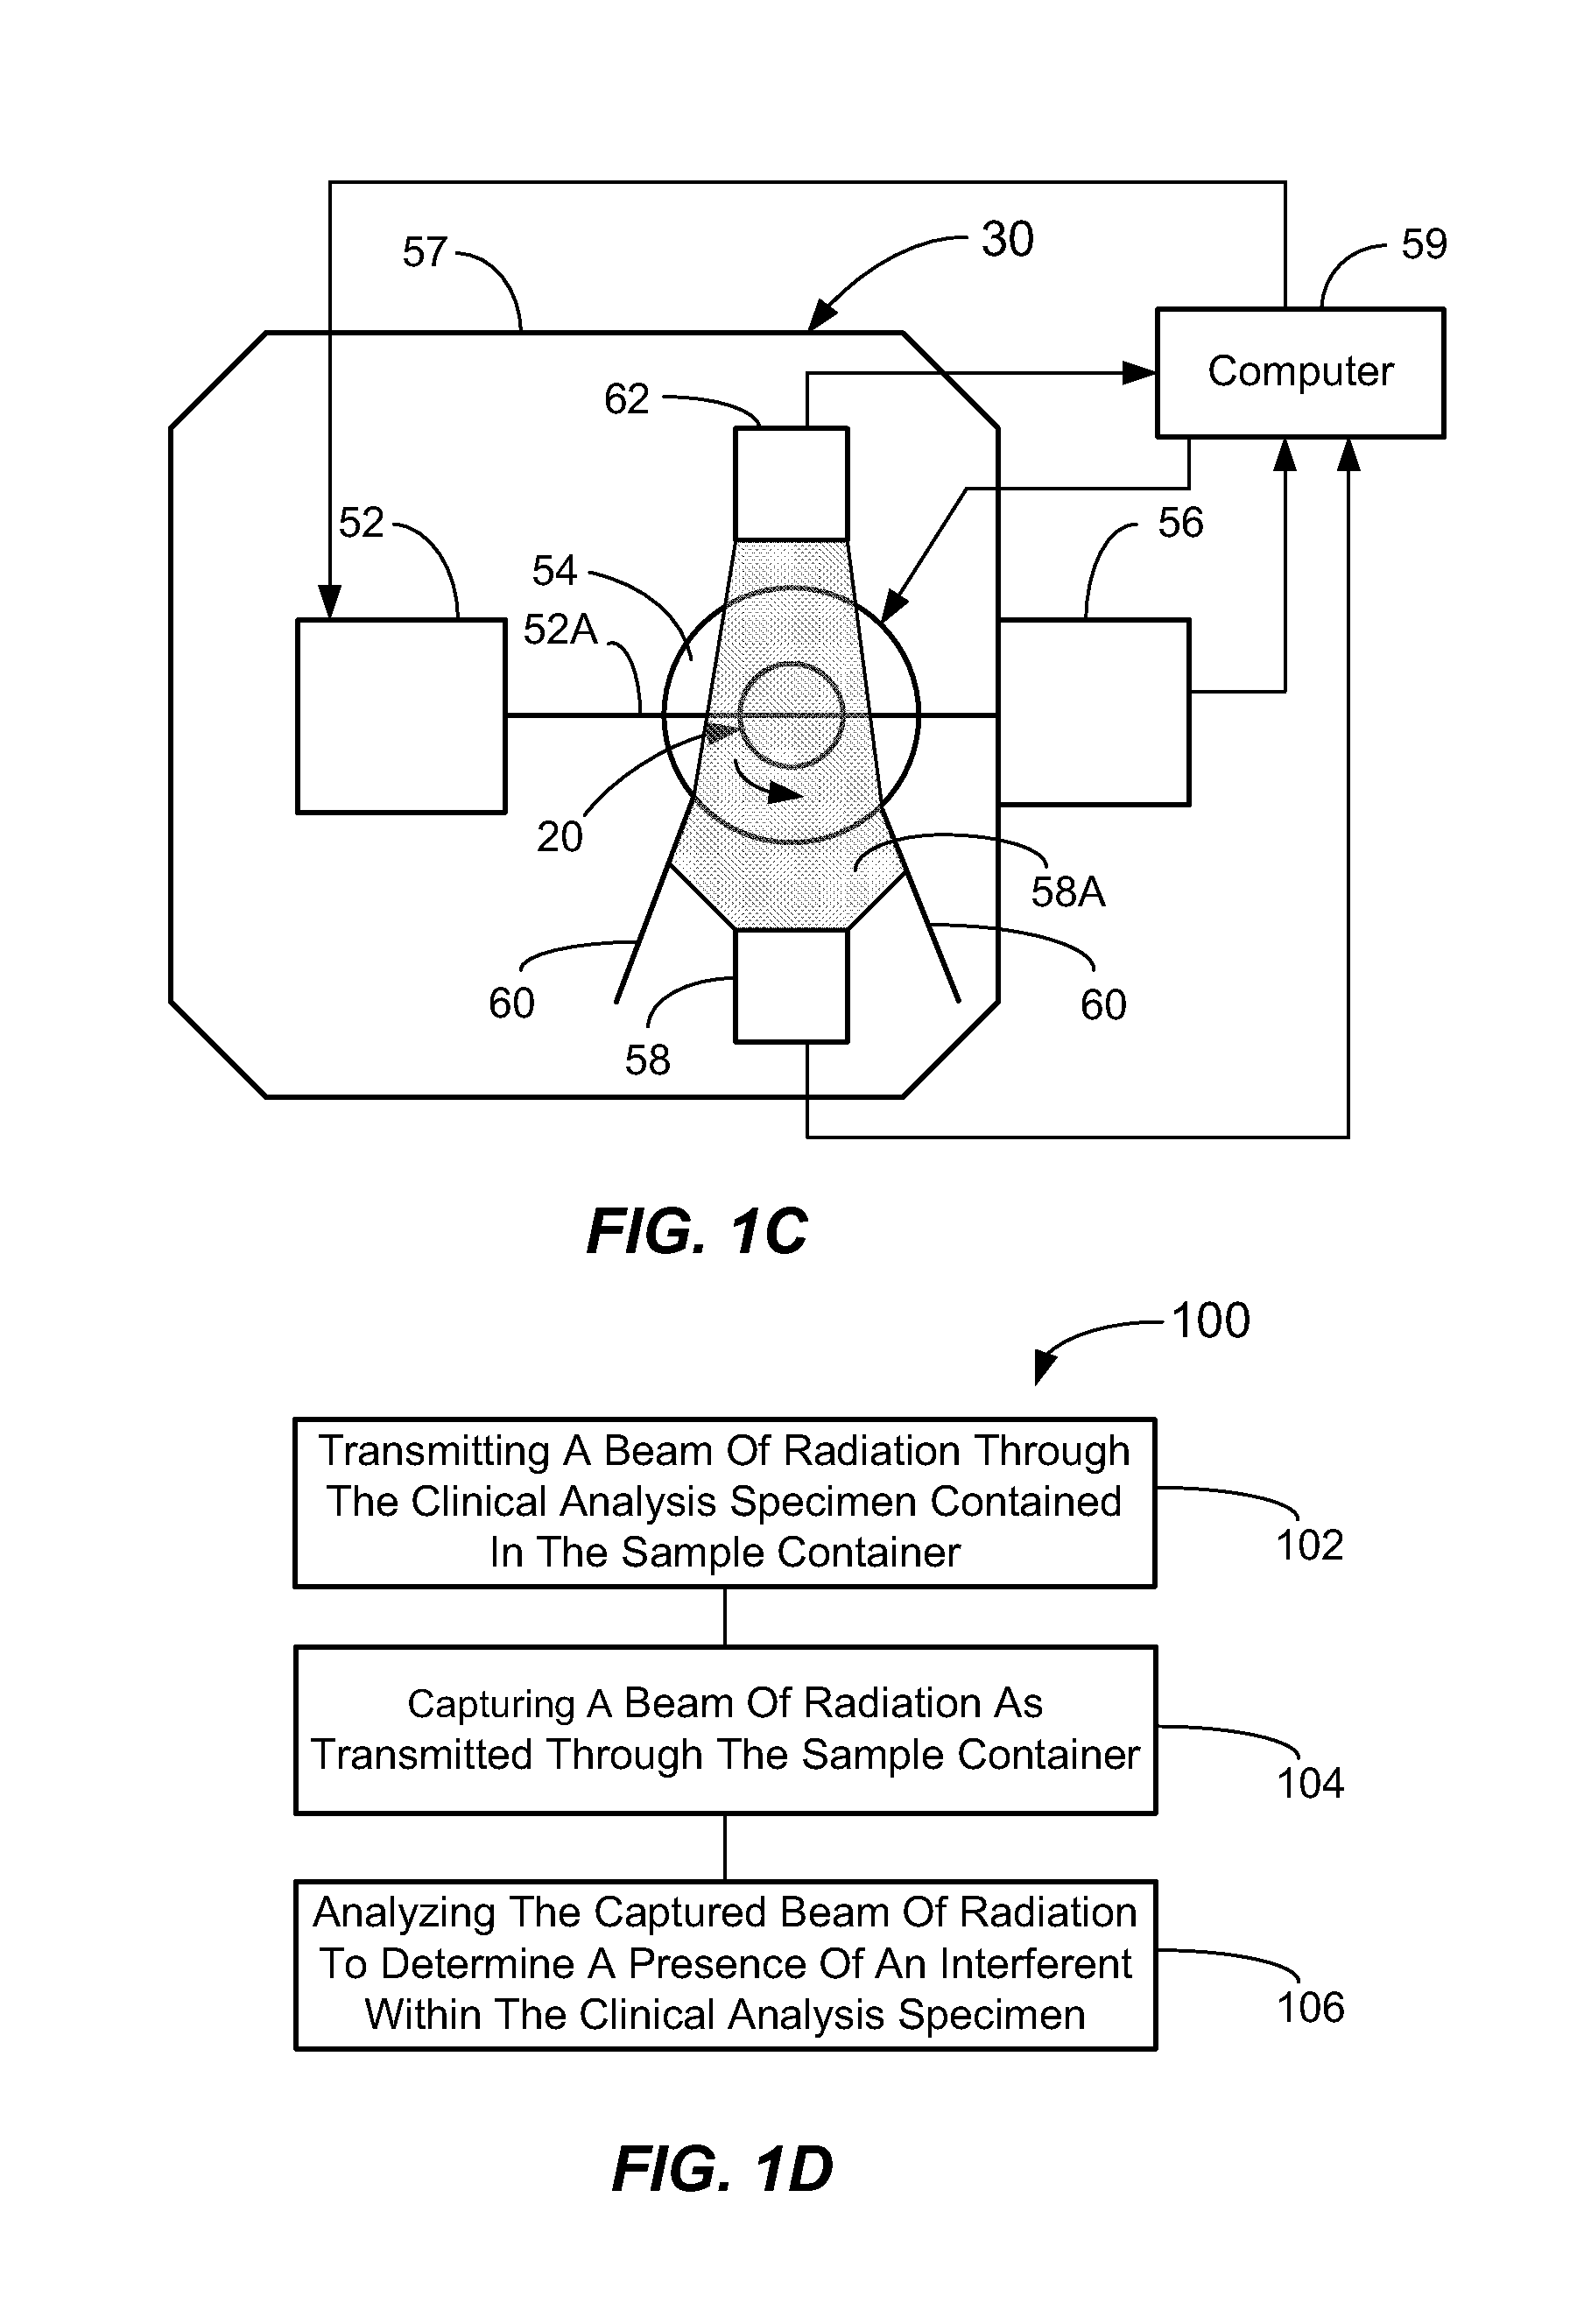 Methods And Apparatus For Ascertaining Interferents And Physical Dimensions In Liquid Samples And Containers To Be Analyzed By A Clinical Analyzer